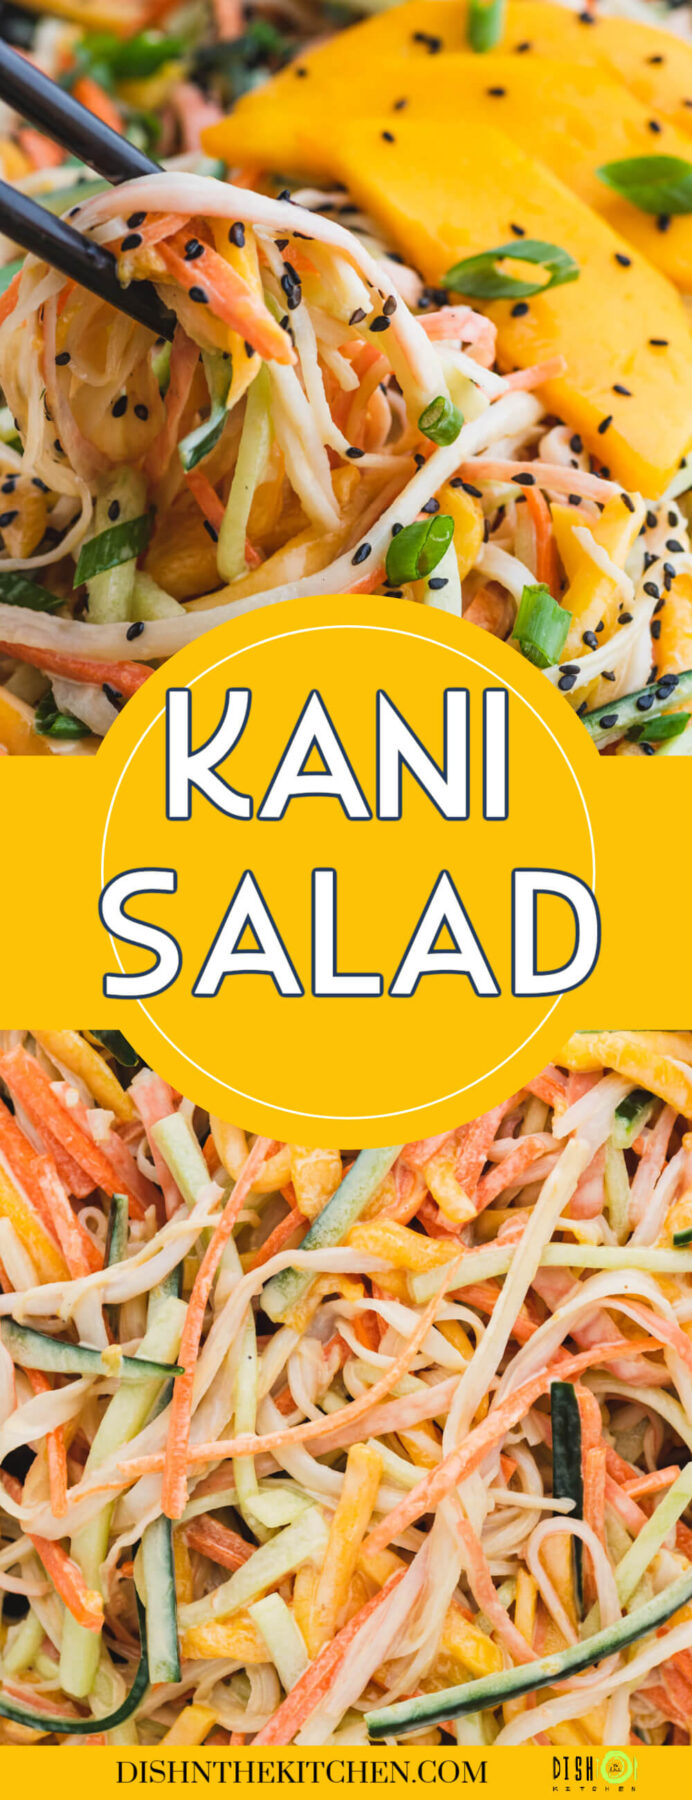 Pinterest image featuring close up photos of creamy Kani Salad with mango slices, shredded imitation crab, carrots, black sesame seeds, scallions, and cucumbers.